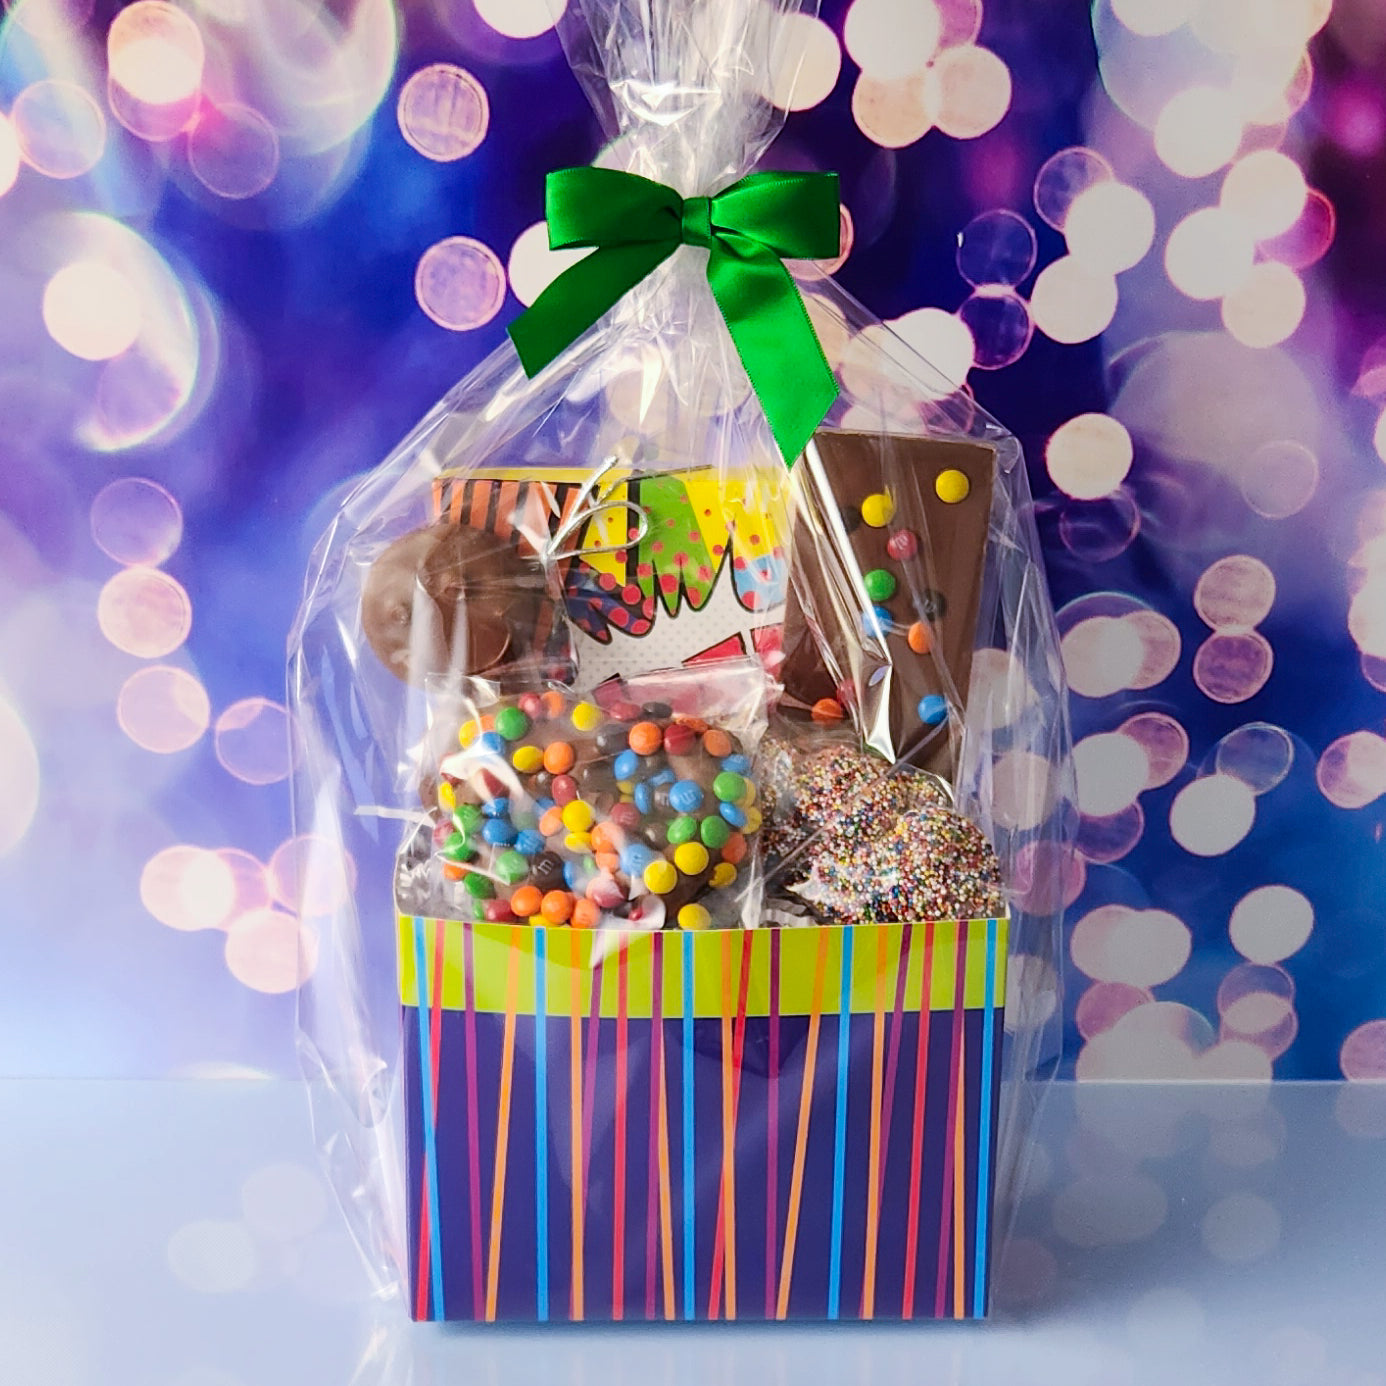 A super hero themed basket that comes with all your favorite chocolate treats. Milk Chocolate Oreos, M & M Pretzel, nonpareils, a chocolate fun bar and a 16 piece chocolate assortment. All overwrapped and tied with a bow making it ready to gift.